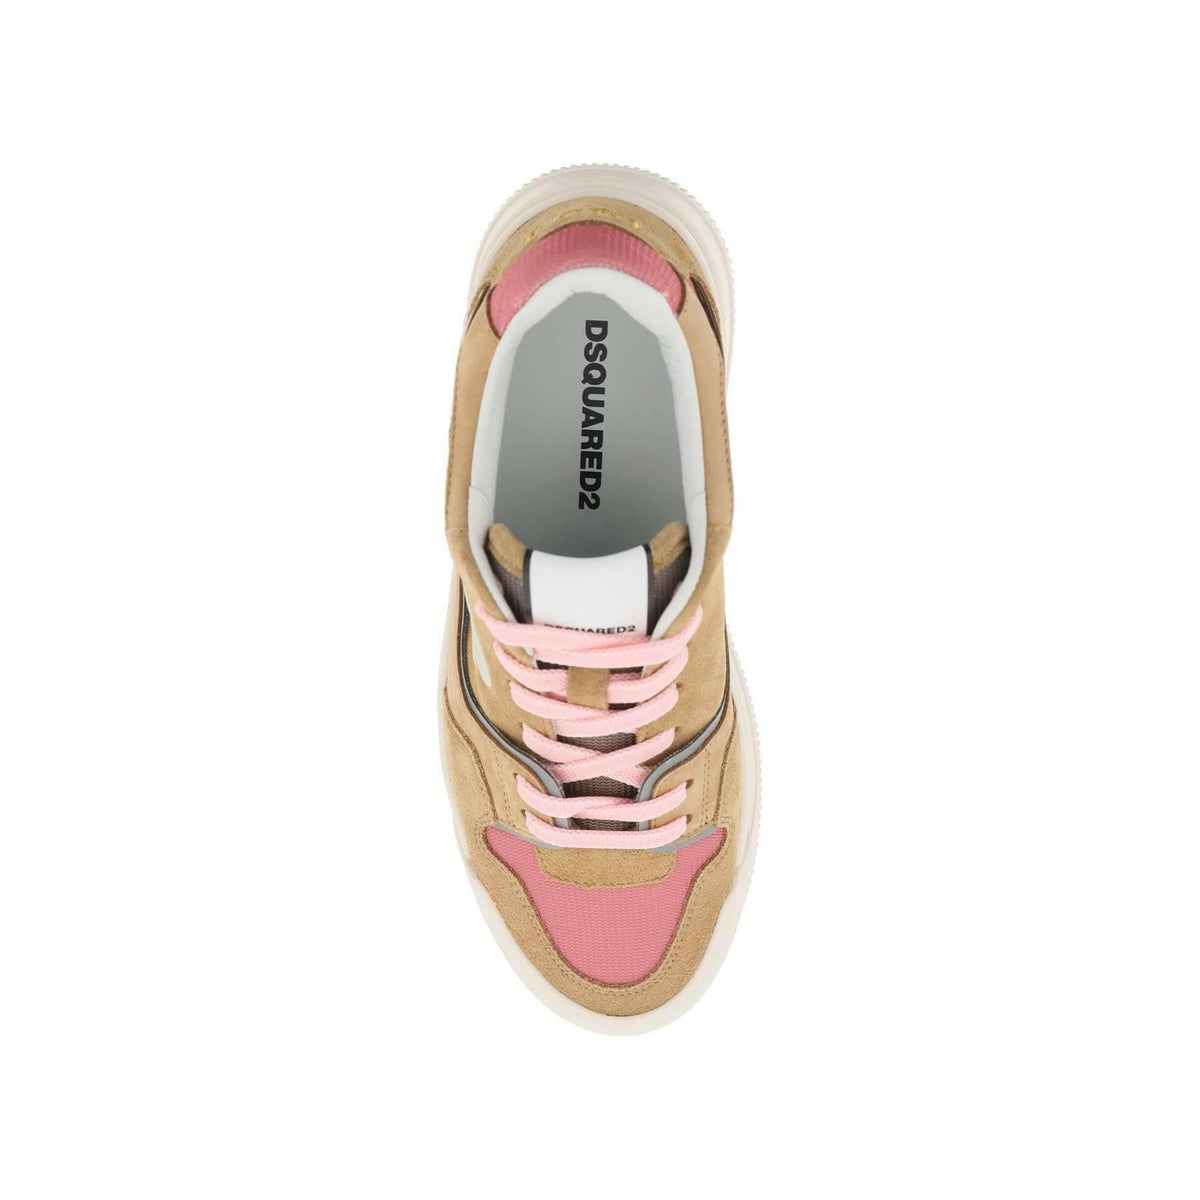 Suede New Jersey Sneakers DSQUARED2 JOHN JULIA.